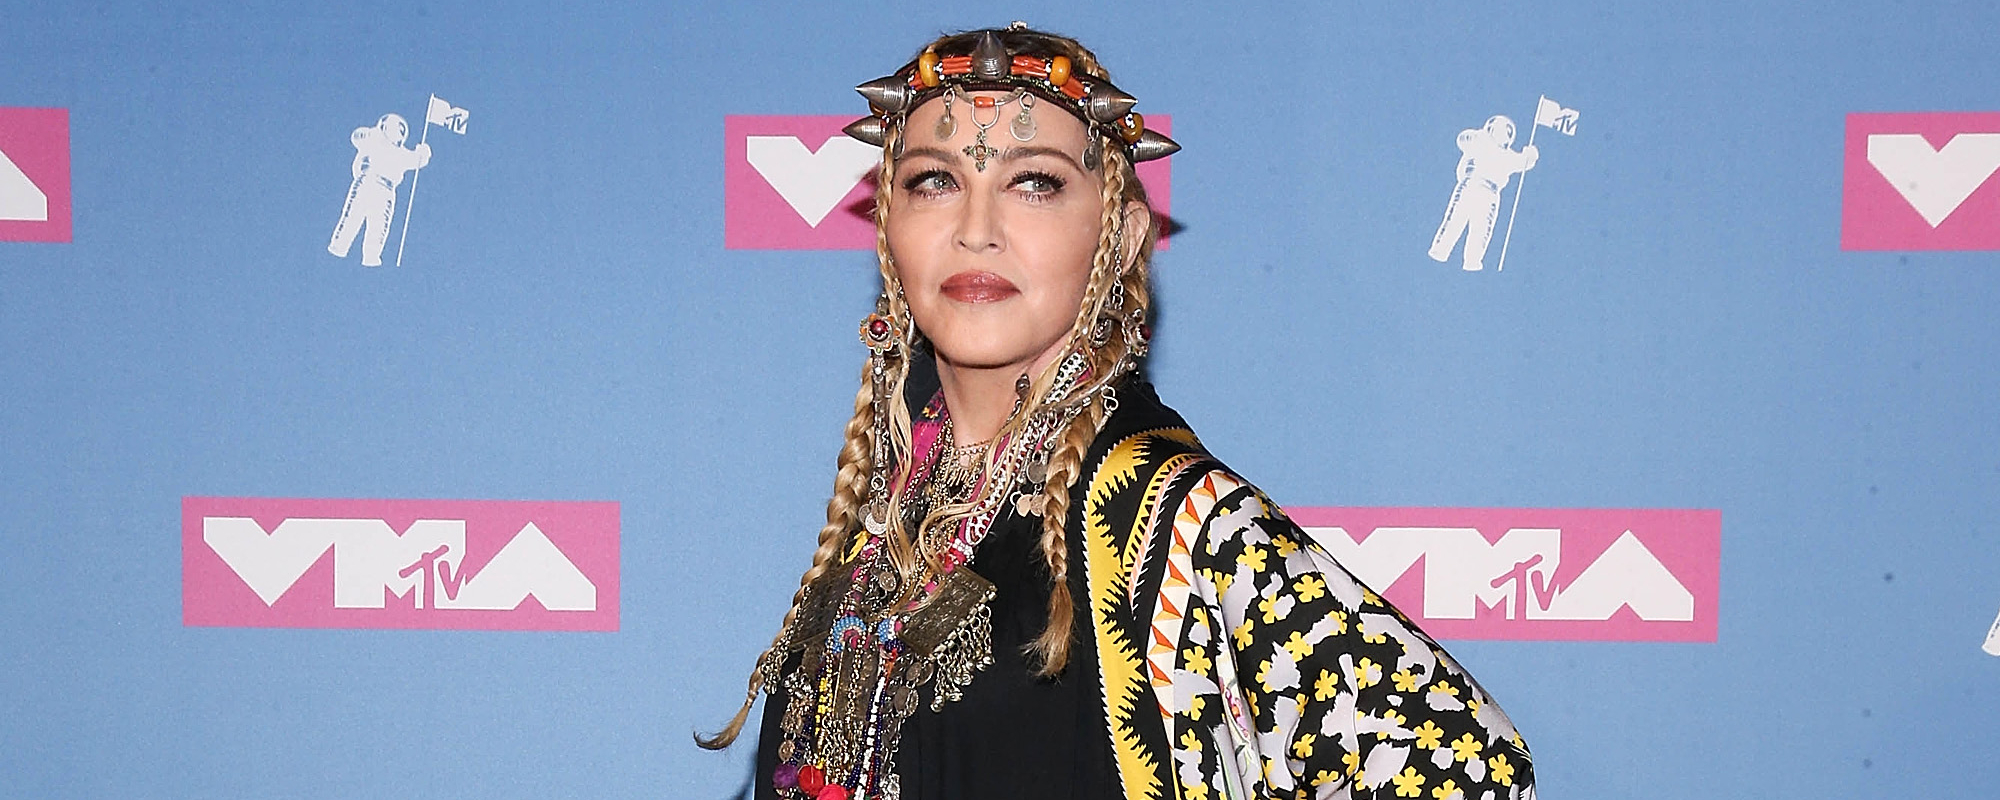 Madonna Shares Her 1-Word Response to God After Waking From “Near-Death” Coma